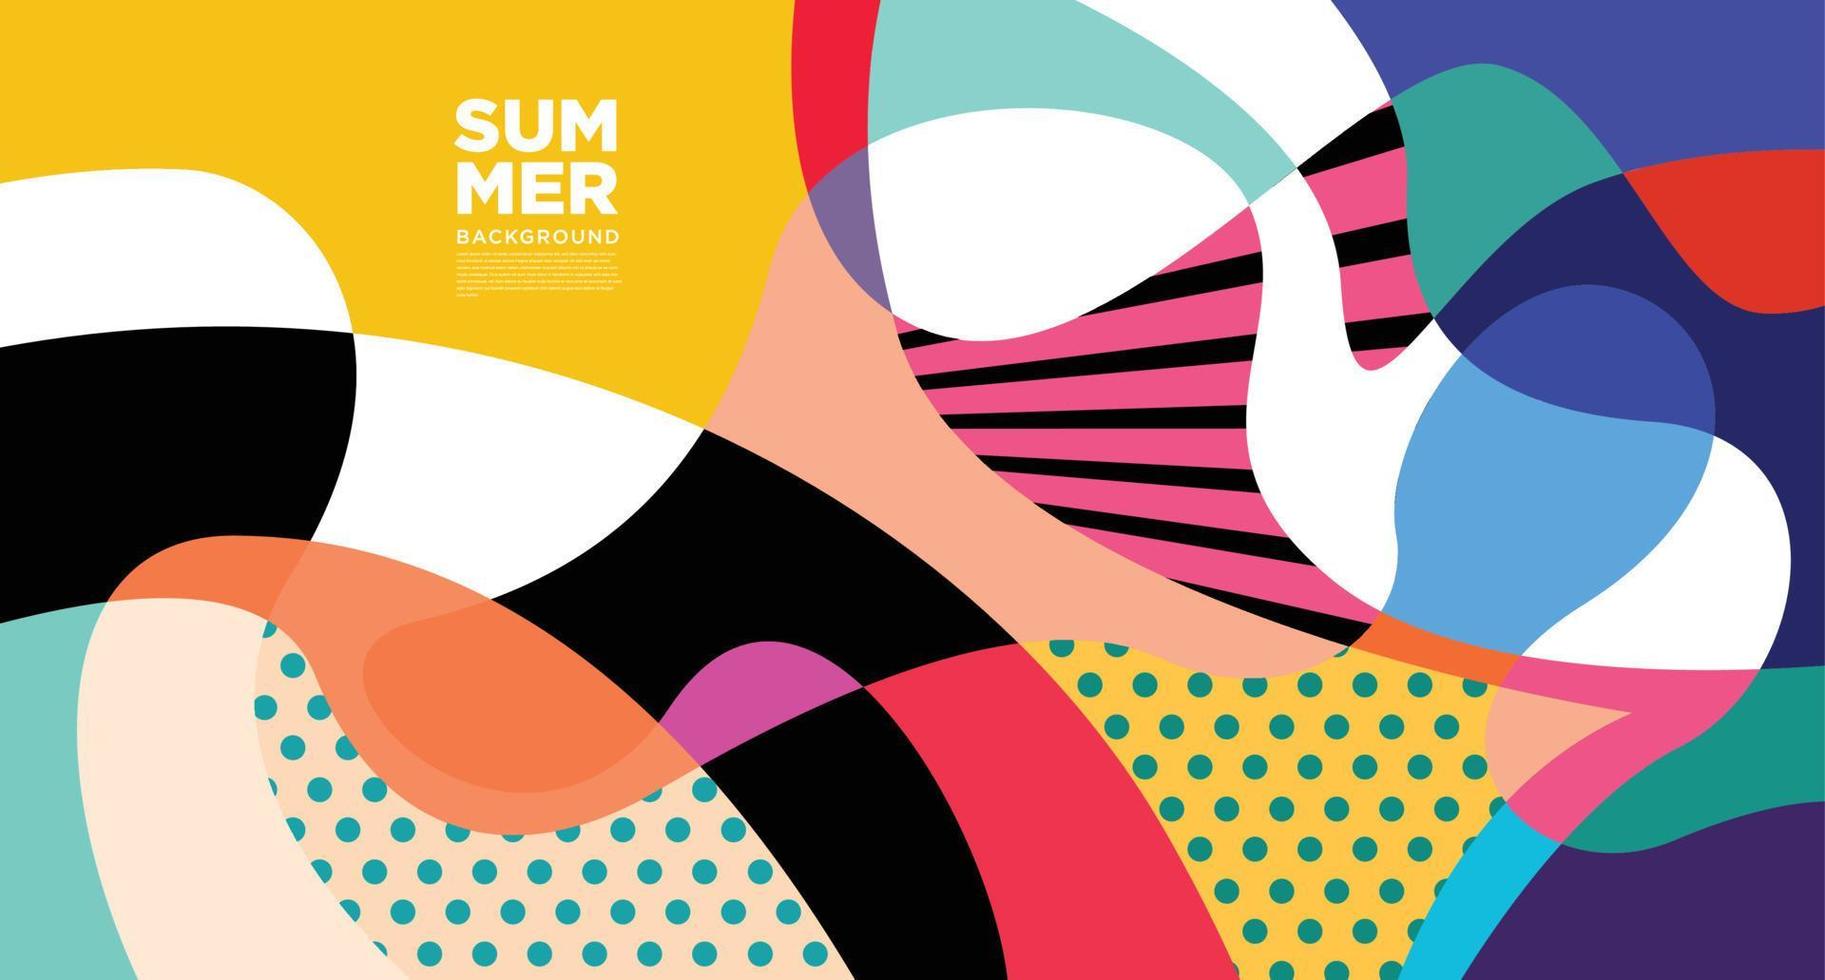 Colorful abstract vector fluid and liquid banner for summer